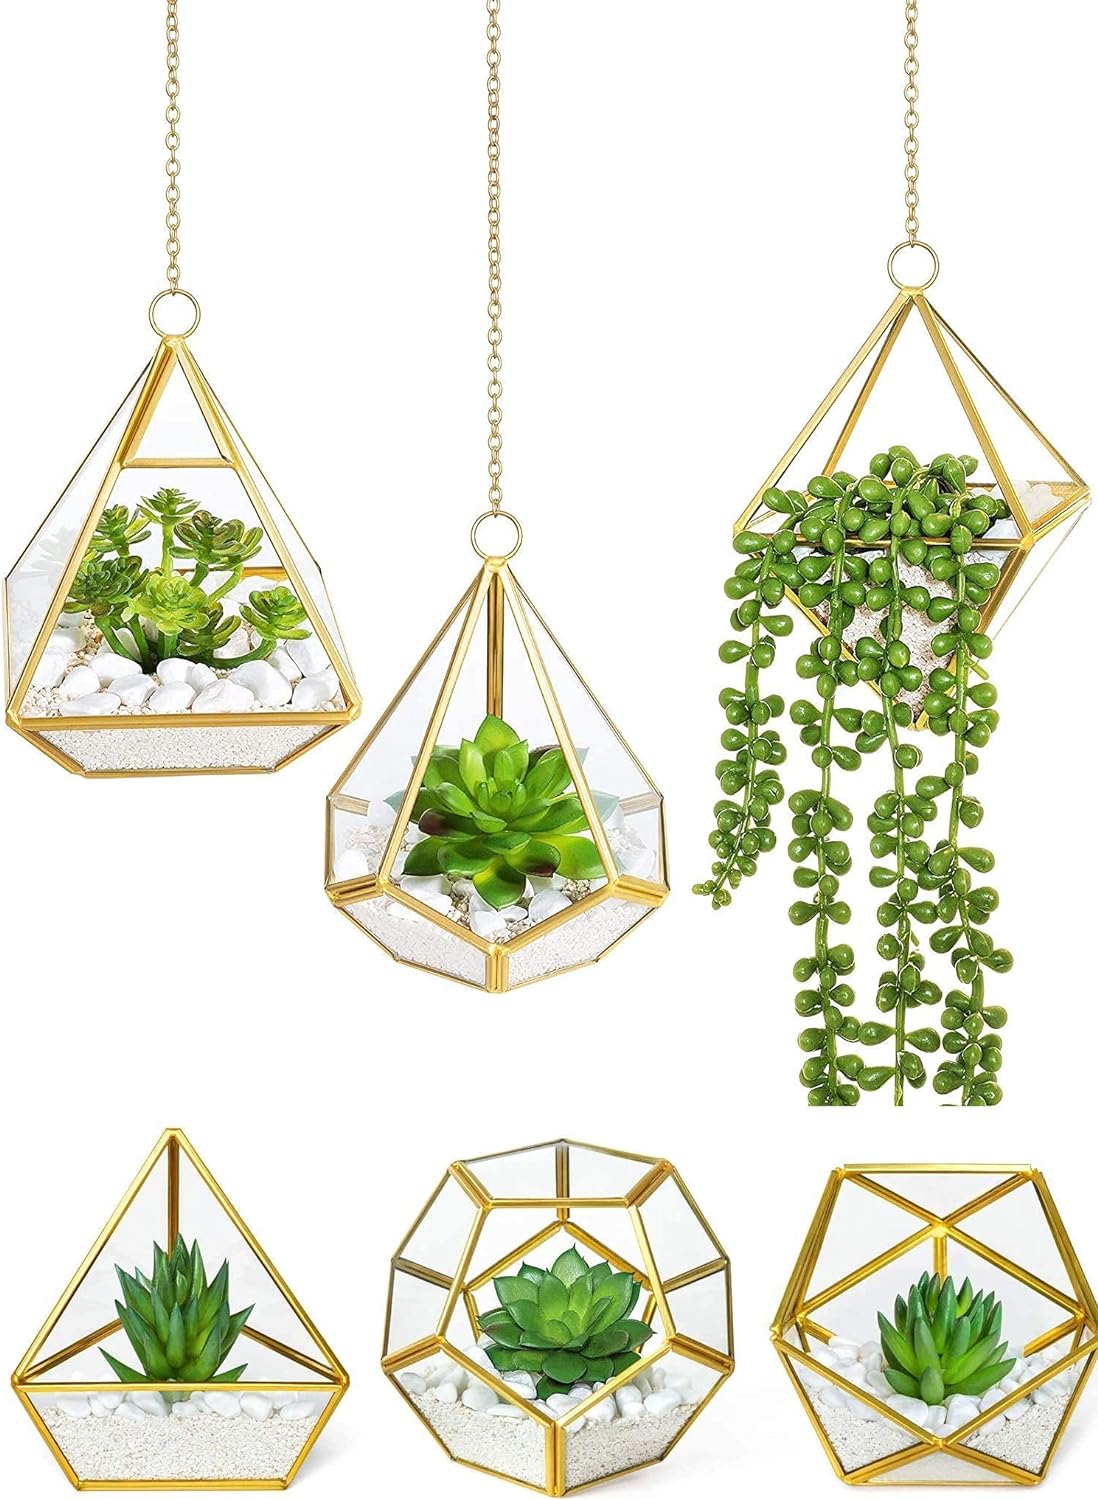 I have received so many compliments on these hanging plants. A few gfs even went out to purchase them. They do require some assembly (rocks, pebbles, and plants are separate). I also had to purchase the hooks for the ceiling but I love them with the lamp below and the glass twinkles at night. Also, since they are fake they require no watering from this height challenged female.